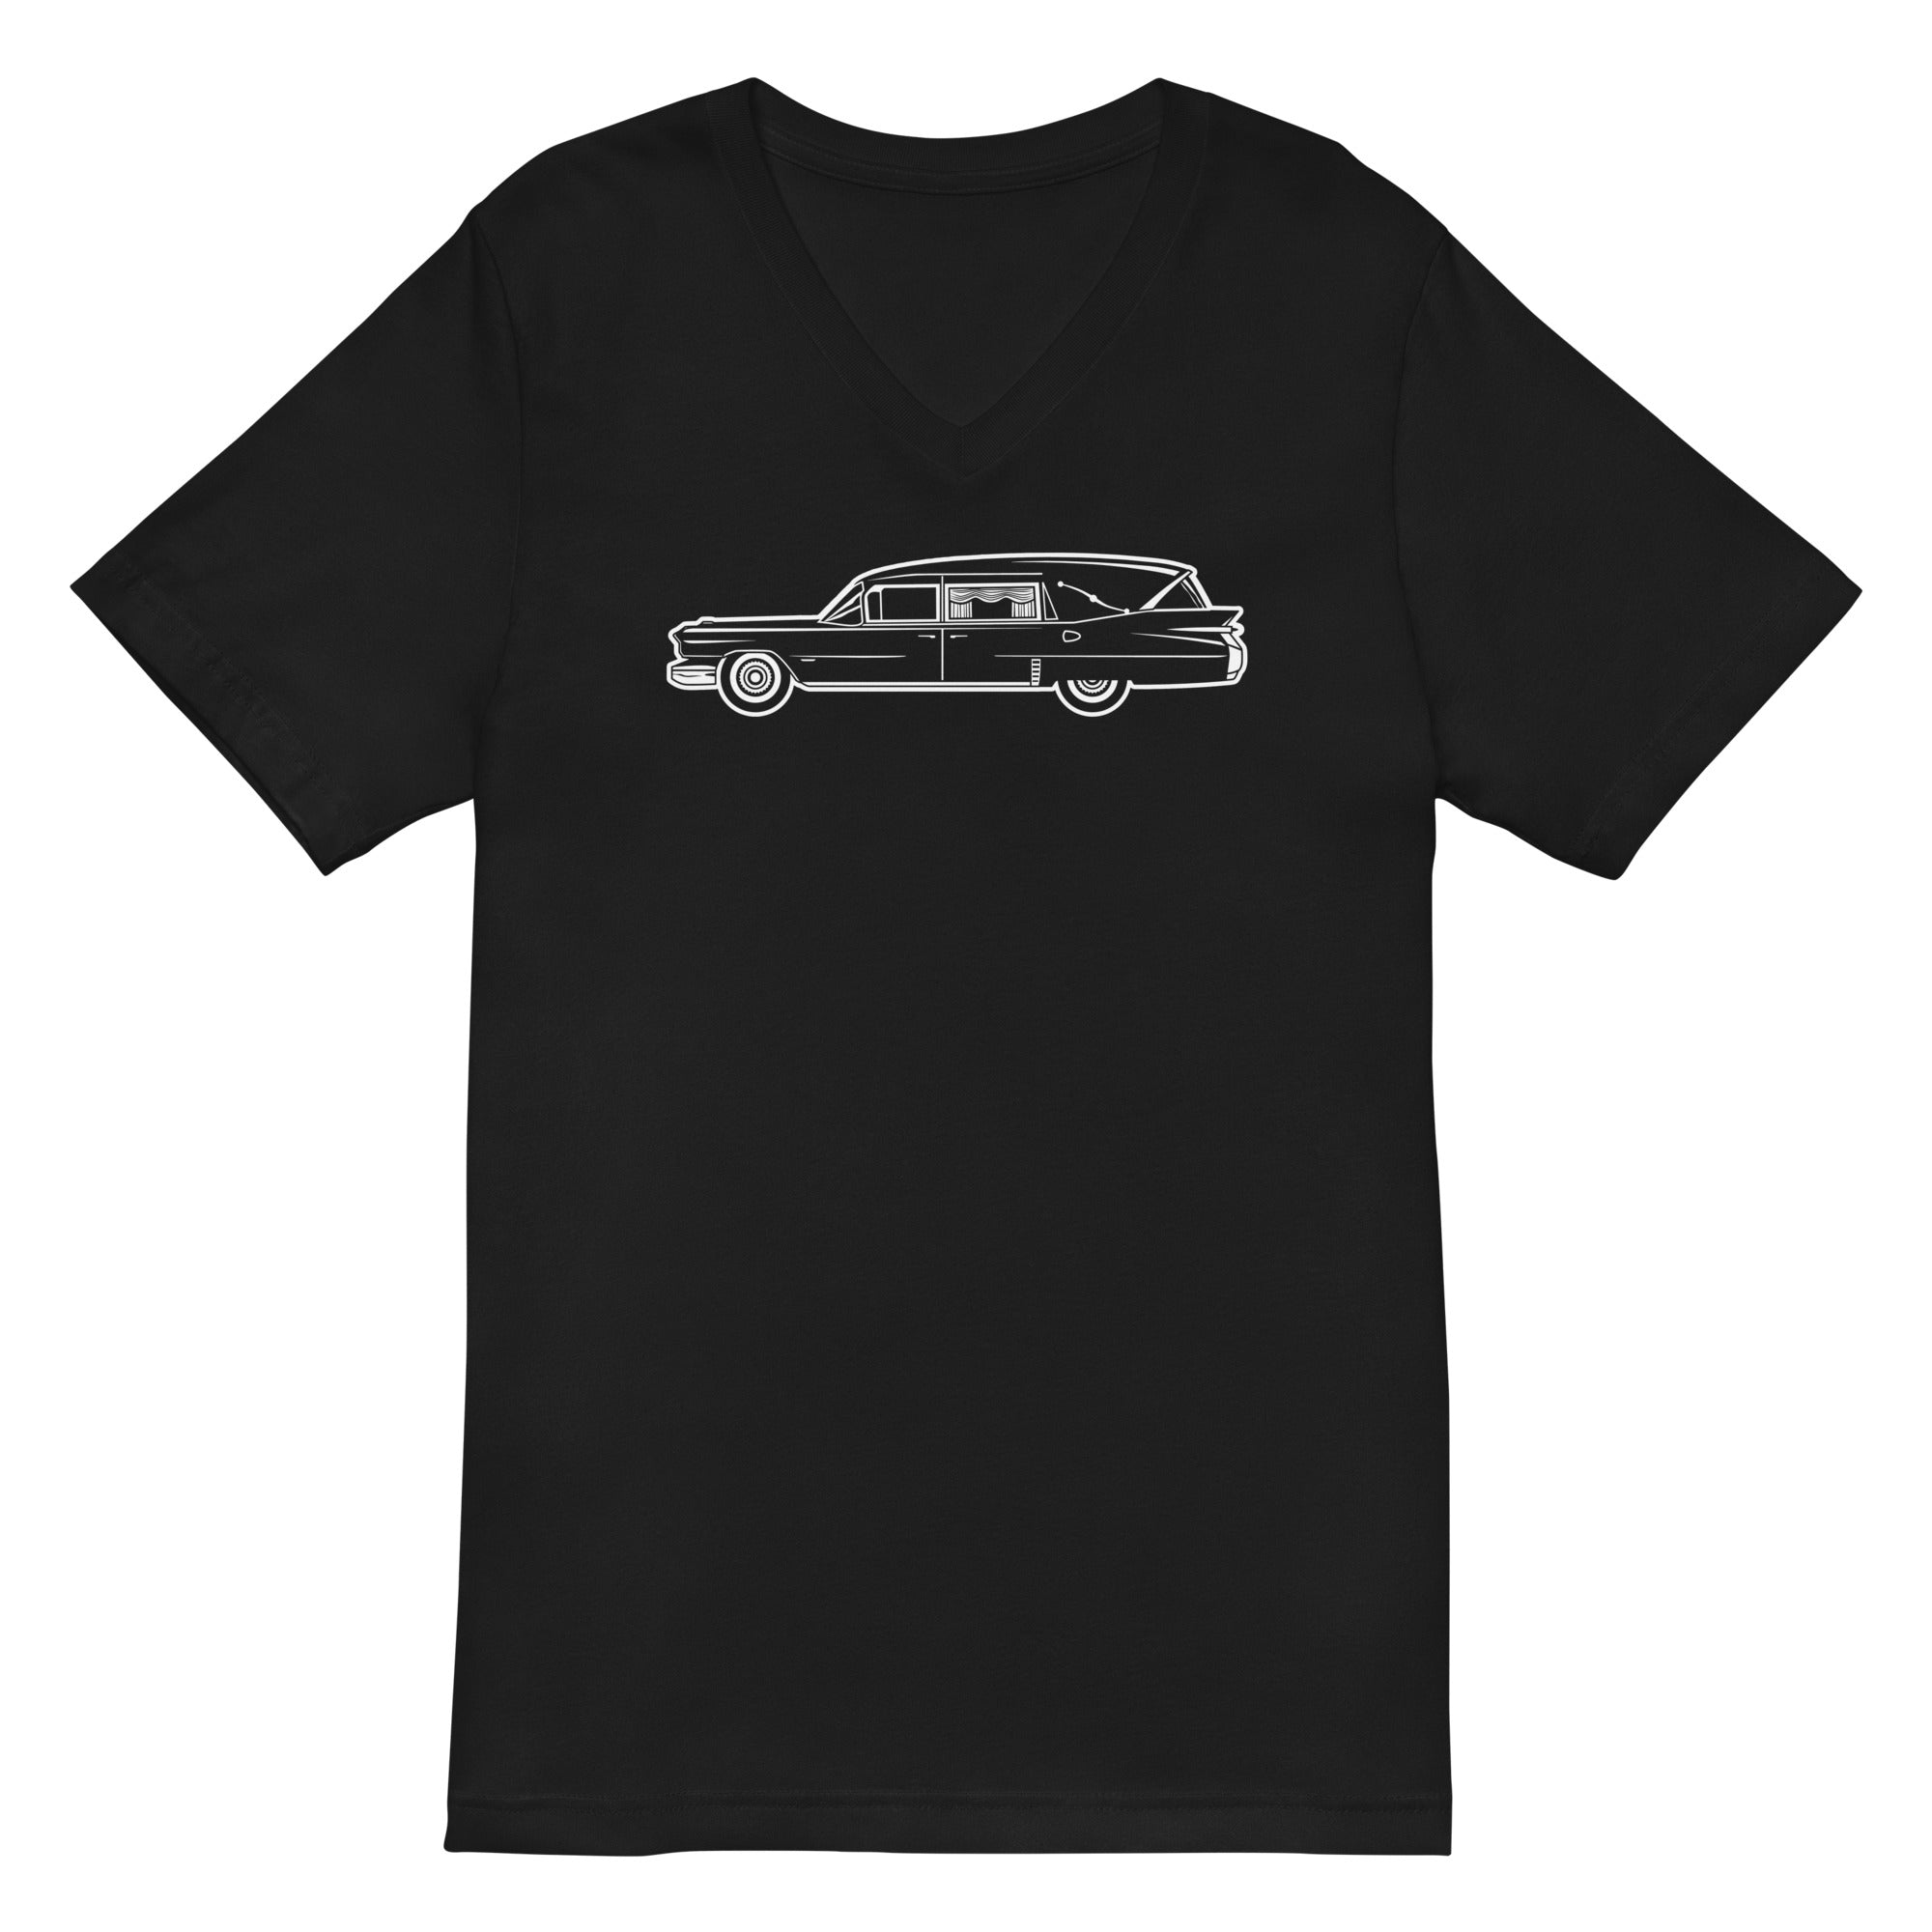 Classic Funeral Hearse Car Gothic Halloween Ride Women’s Short Sleeve V-Neck T-Shirt